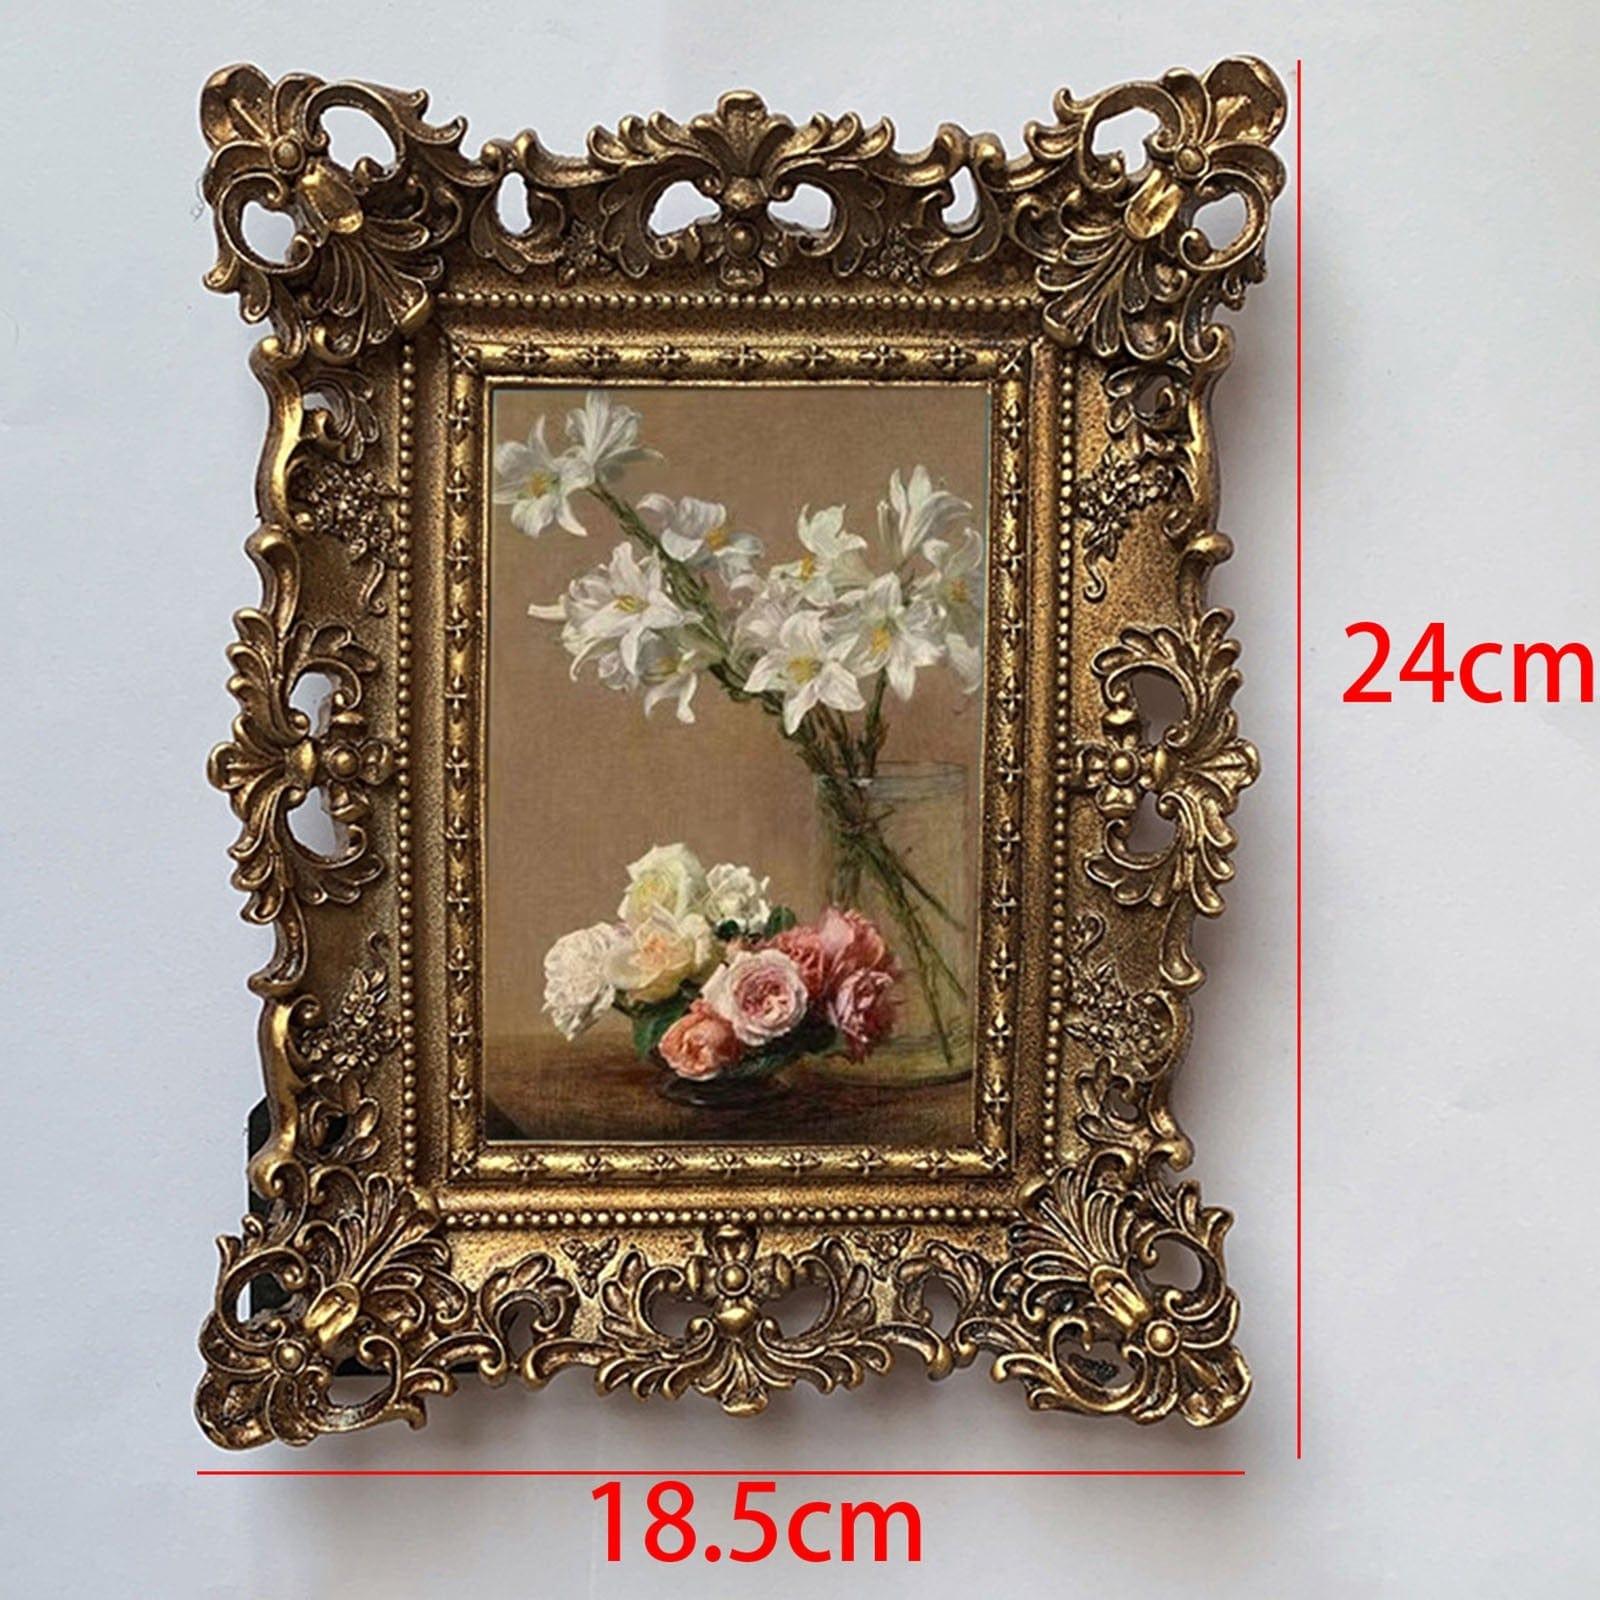 Shop 0 24cmx18.5cm European Style Photo Frame Embossed Floral Tabletop Hanging Picture Holder Mademoiselle Home Decor